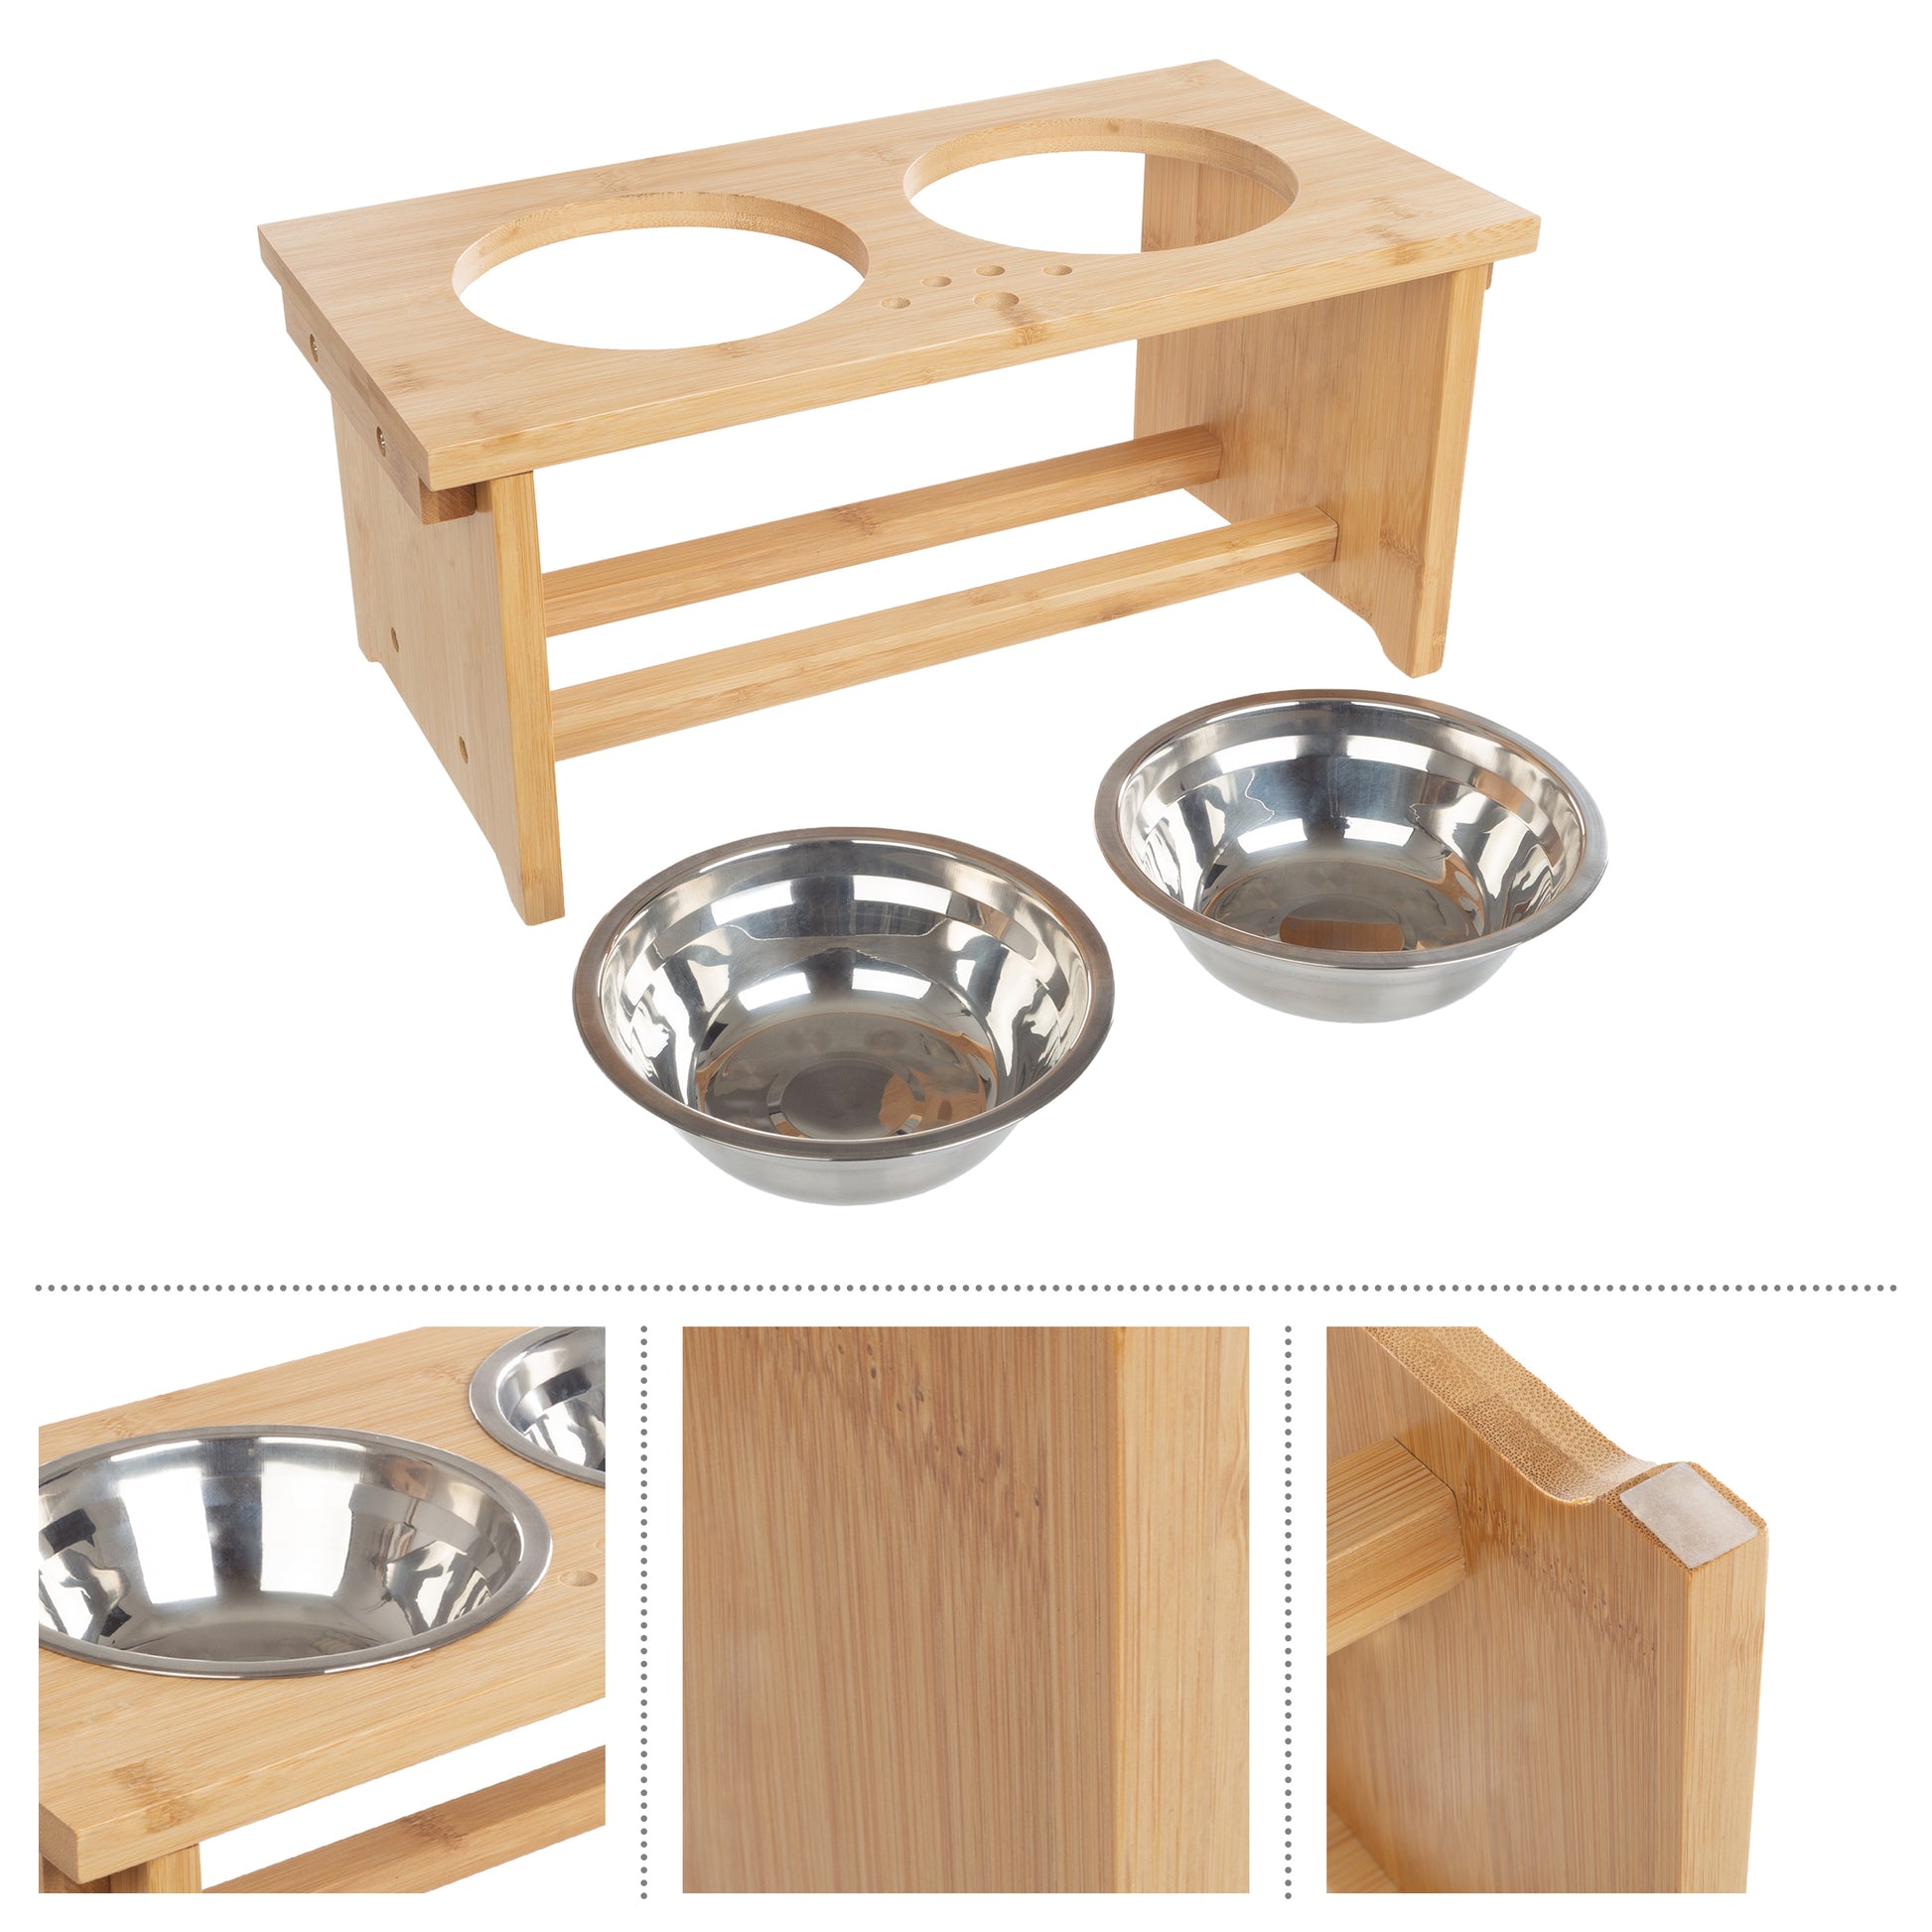 10 Elevated Raised Dog Feeder Stainless Steel Double Bowl Food